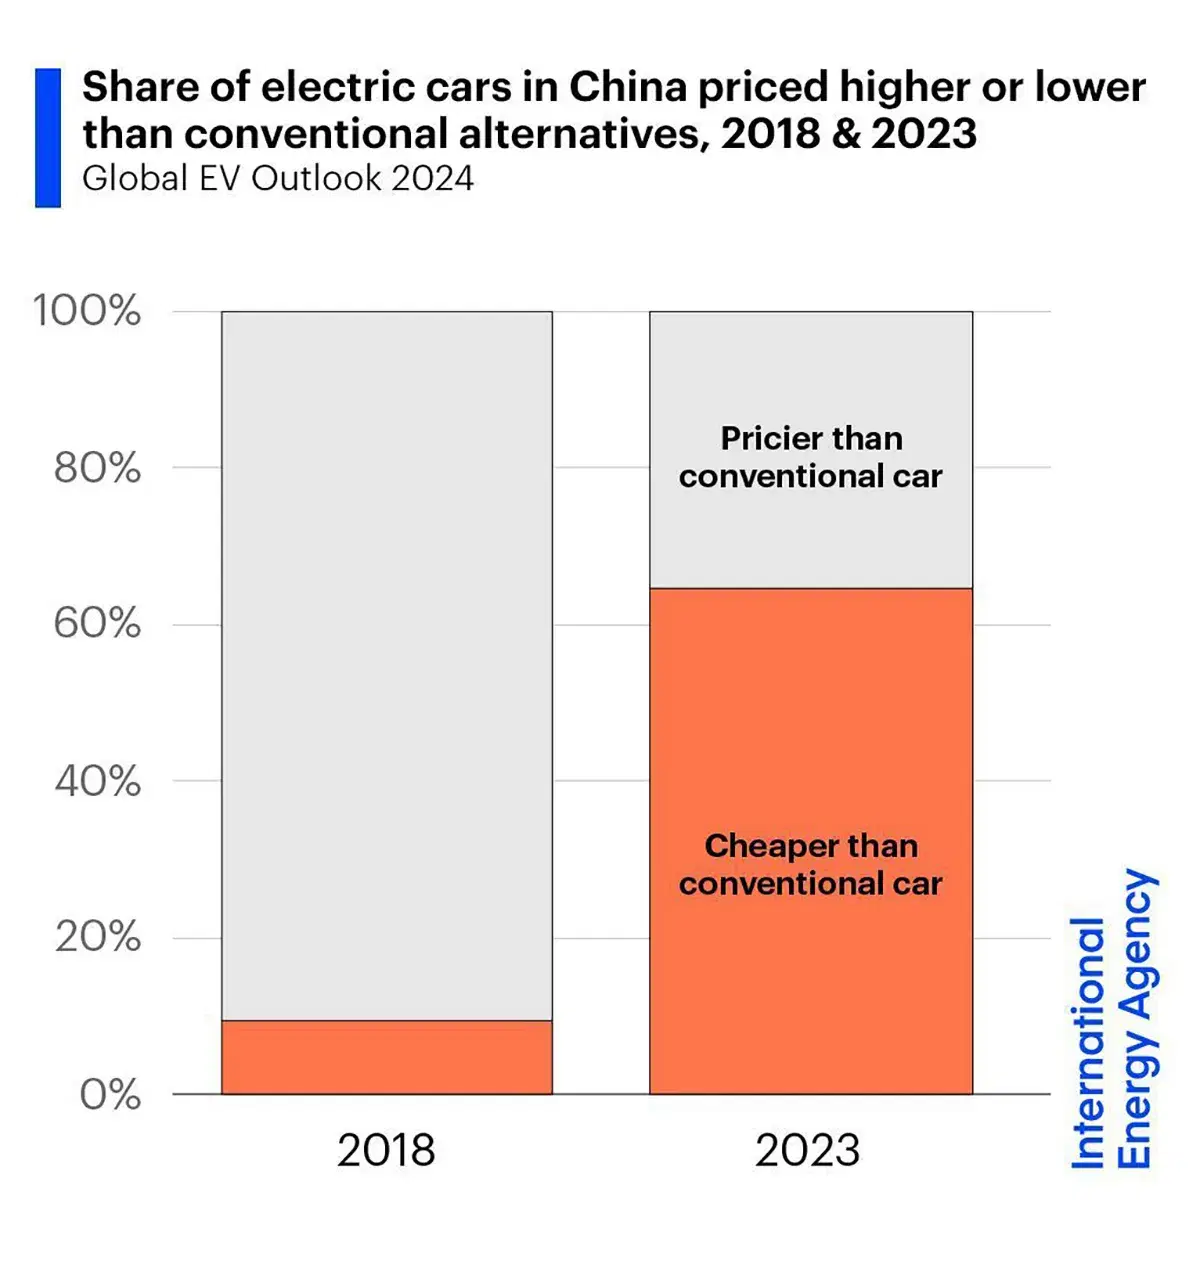 In China, Over 60% of EVs are already cheaper than conventional equivalents  